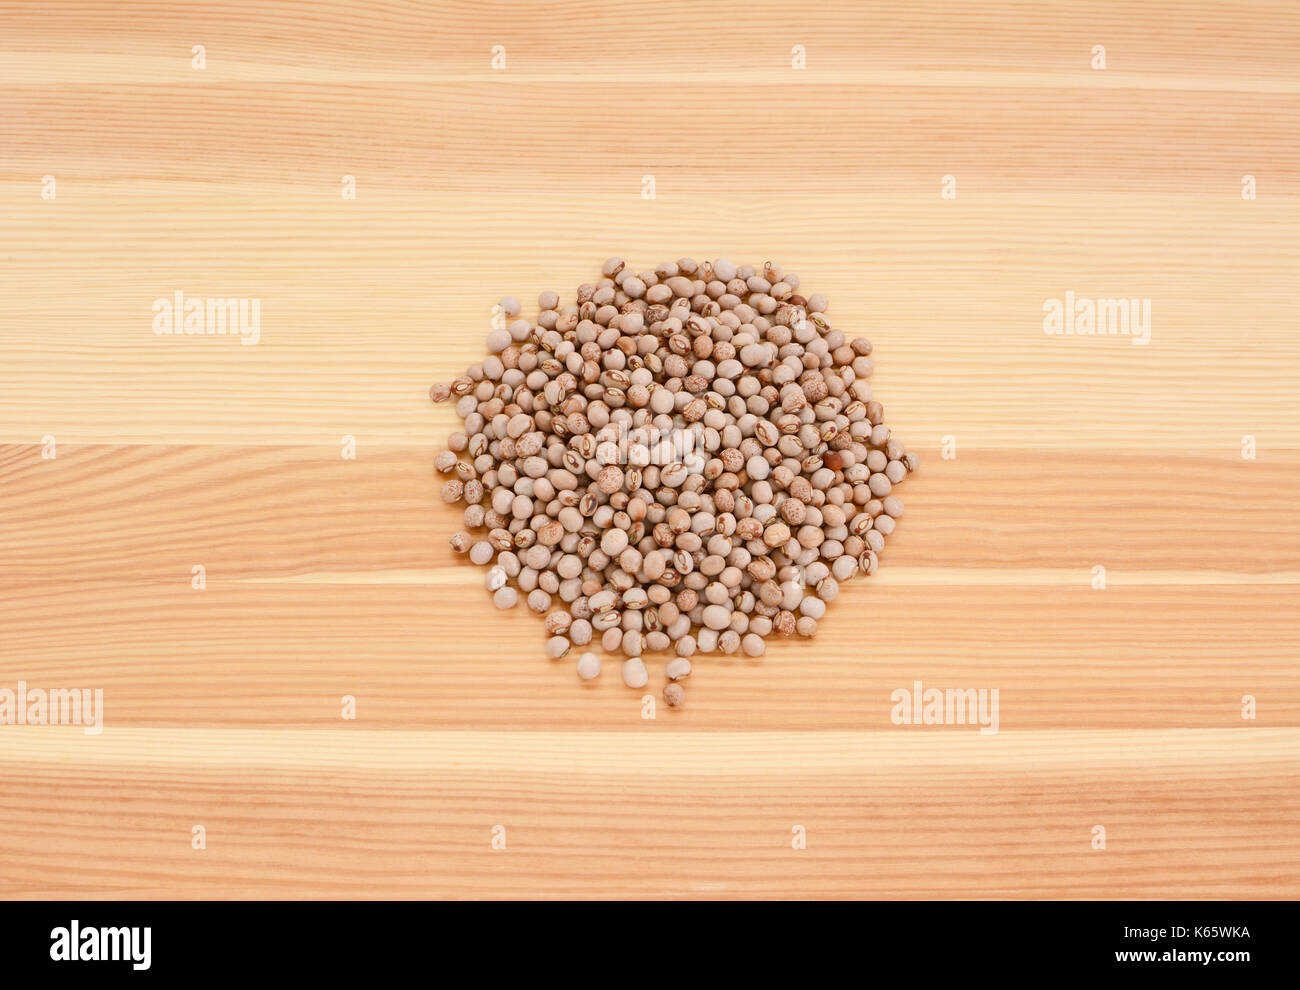 Pigeon peas on a wooden background, pine wood grain Stock Photo